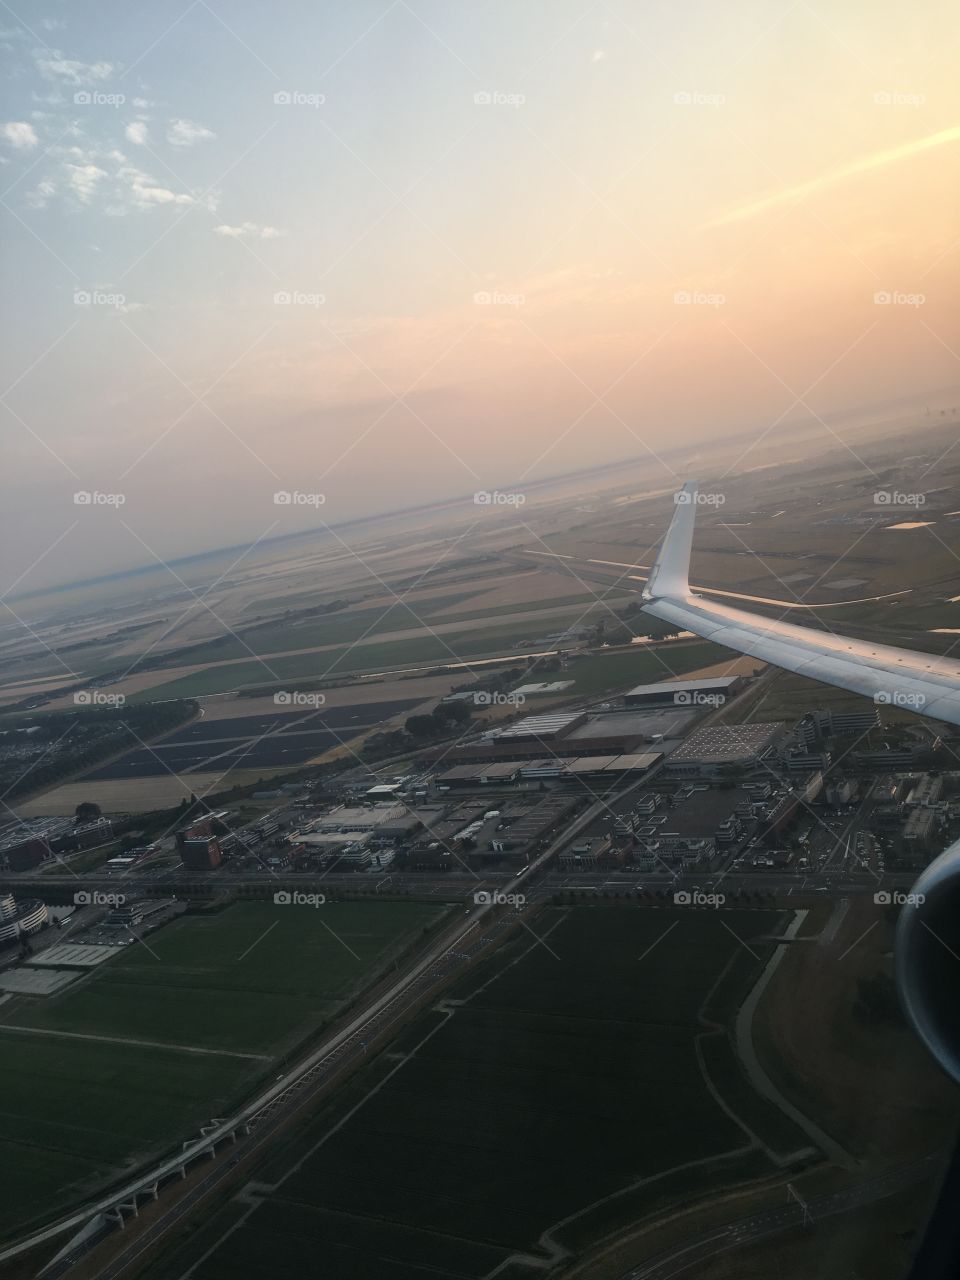 Taking off from Amsterdam Schiphol airport in the morning.